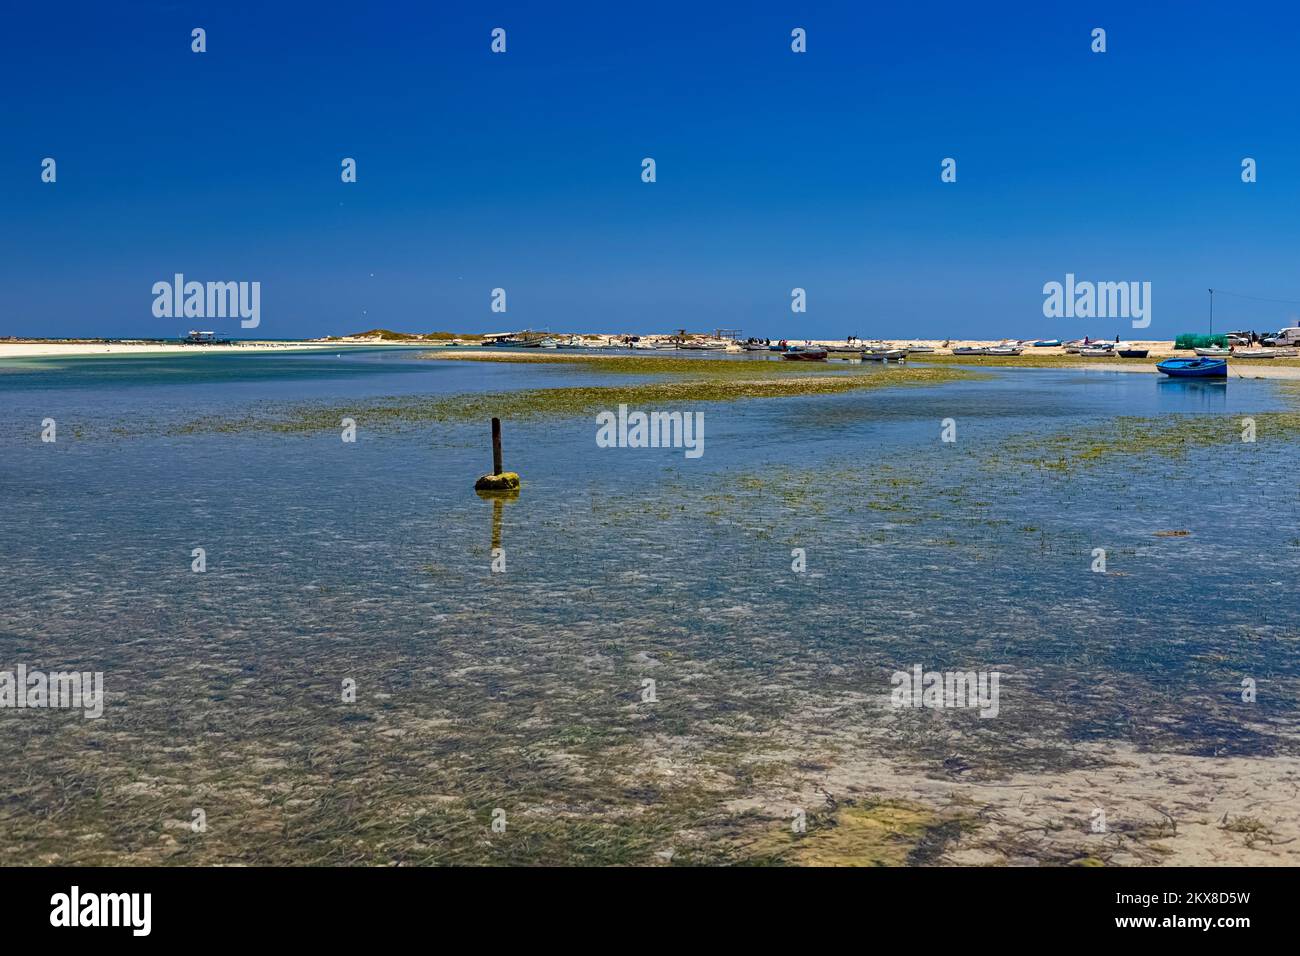 View of boats in the bay at low tide on the beach in the Mediterranean Sea on the island of Djerba, Tunisia Stock Photo